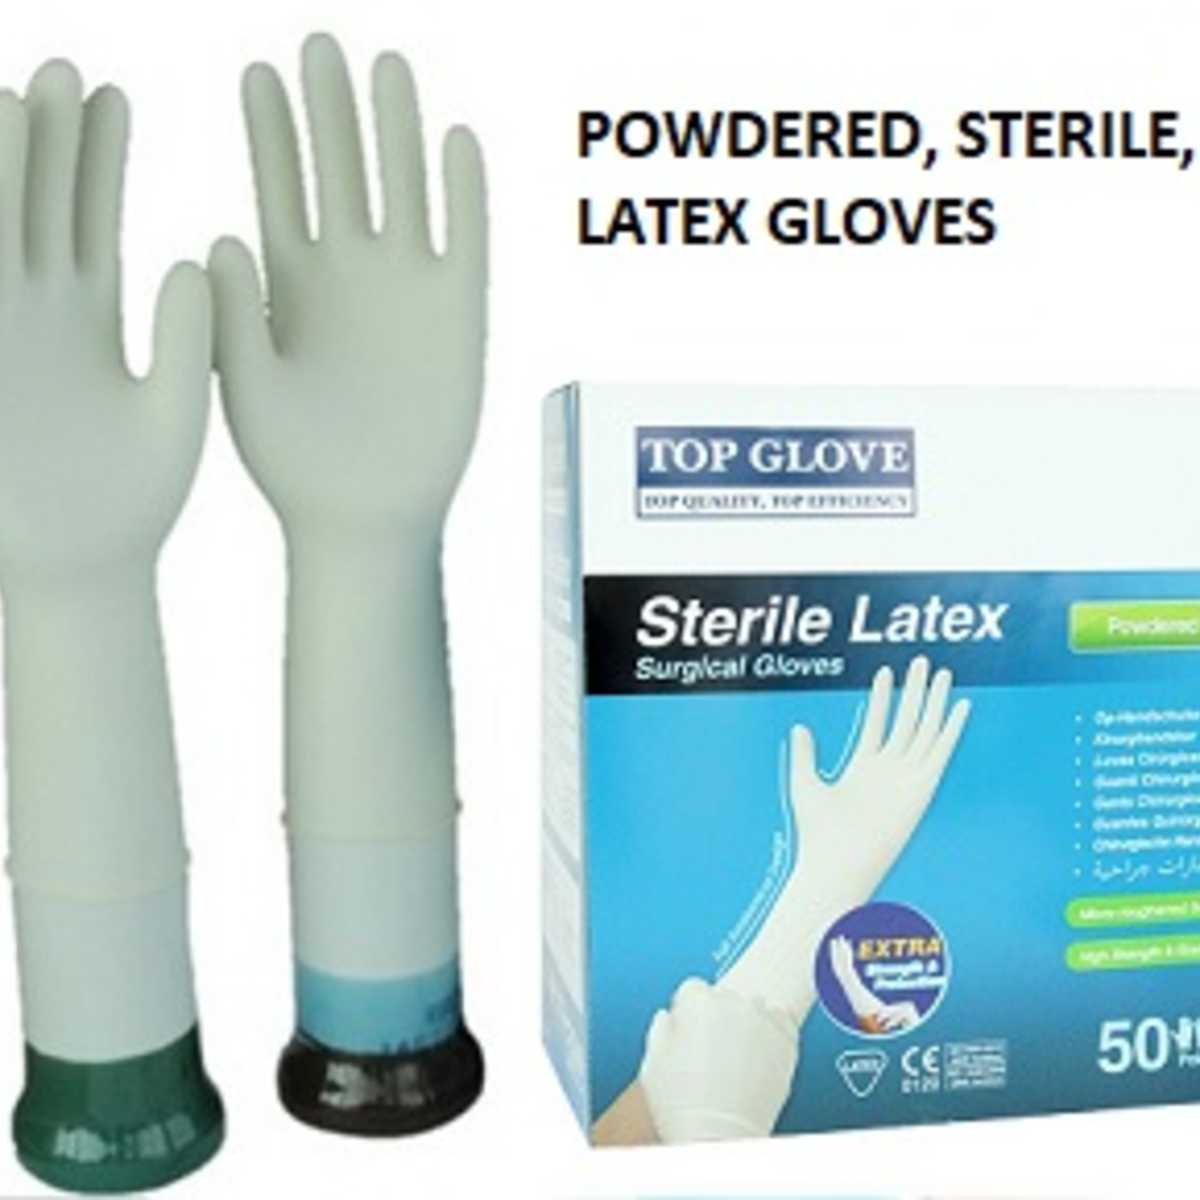 8.0 Sterile Latex Surgical Glove, Powdered